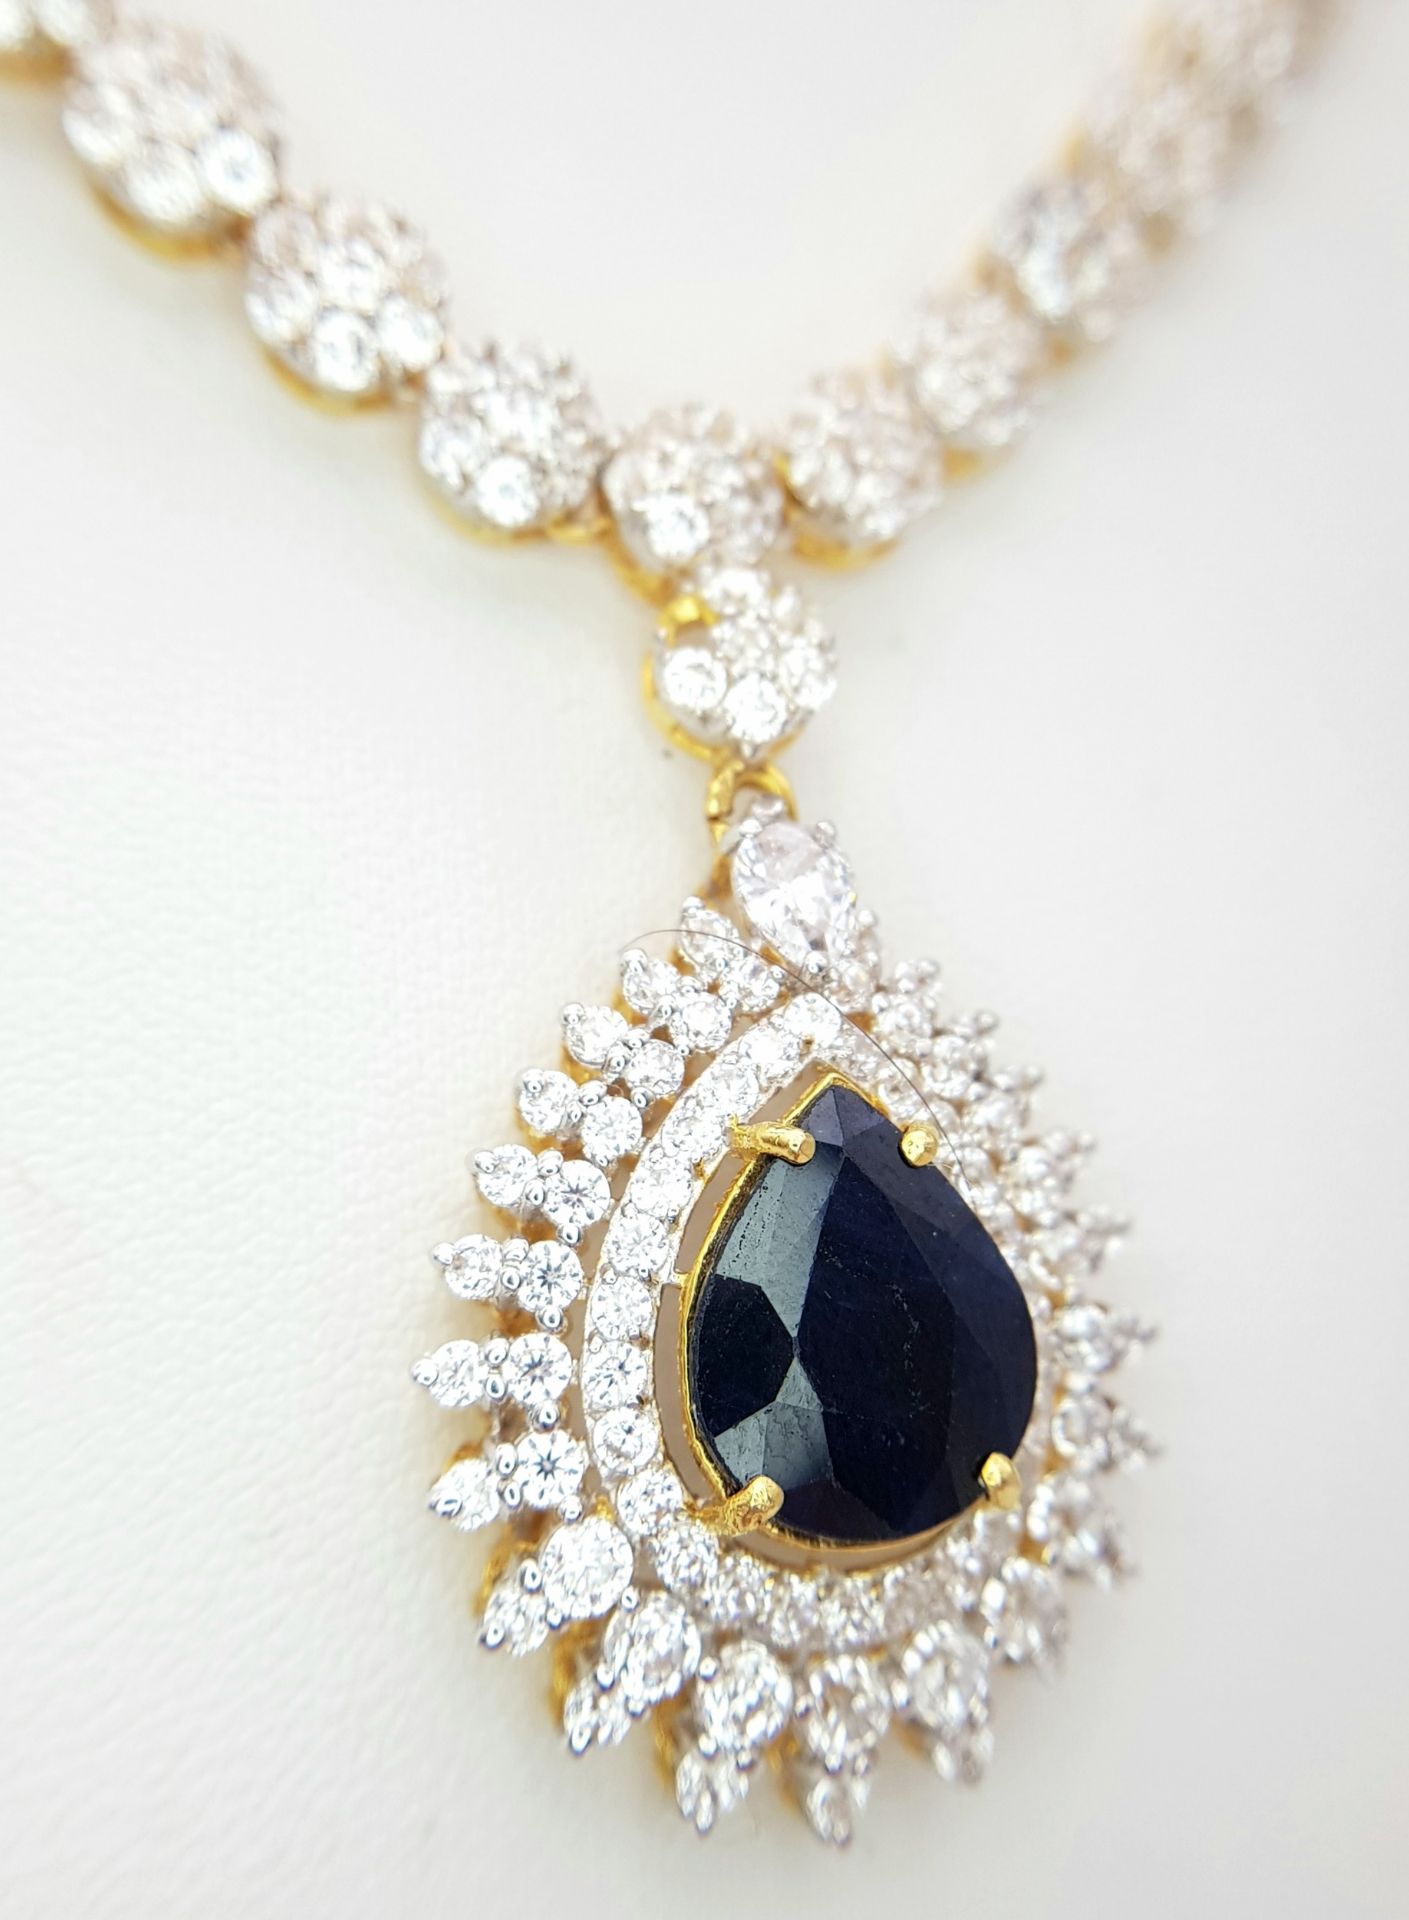 A Fabulous Jewellery Lot! A 21K Rich Yellow Gold Diamond and White Stone (one missing) Necklace with - Image 7 of 7